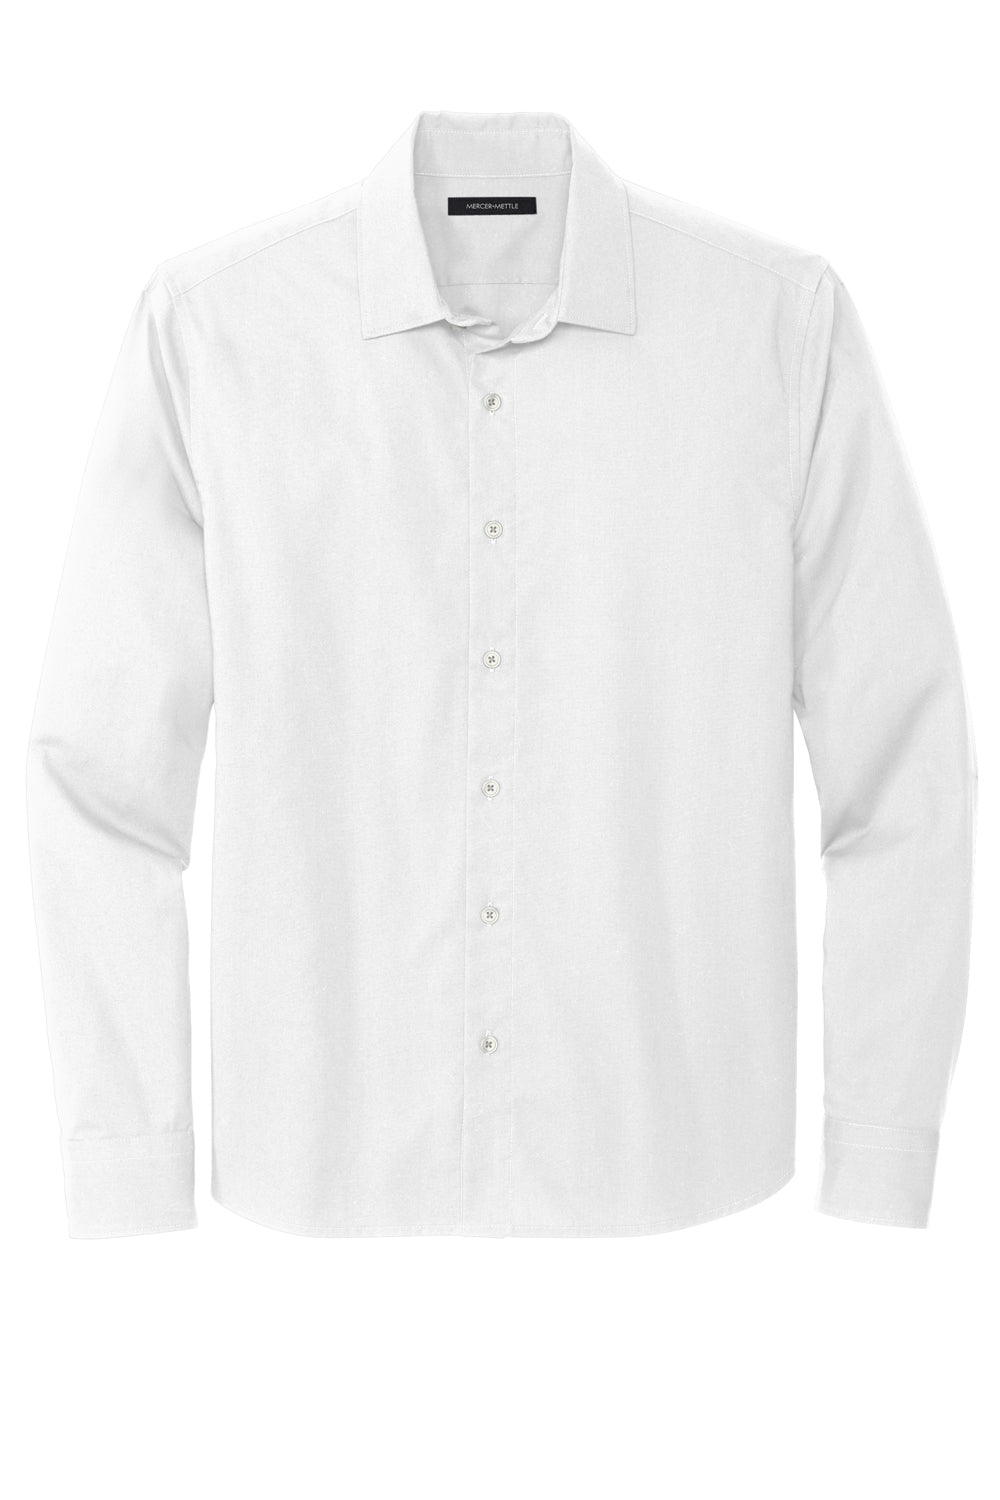 Mercer+Mettle MM2000 Stretch Woven Long Sleeve Button Down Shirt White Flat Front